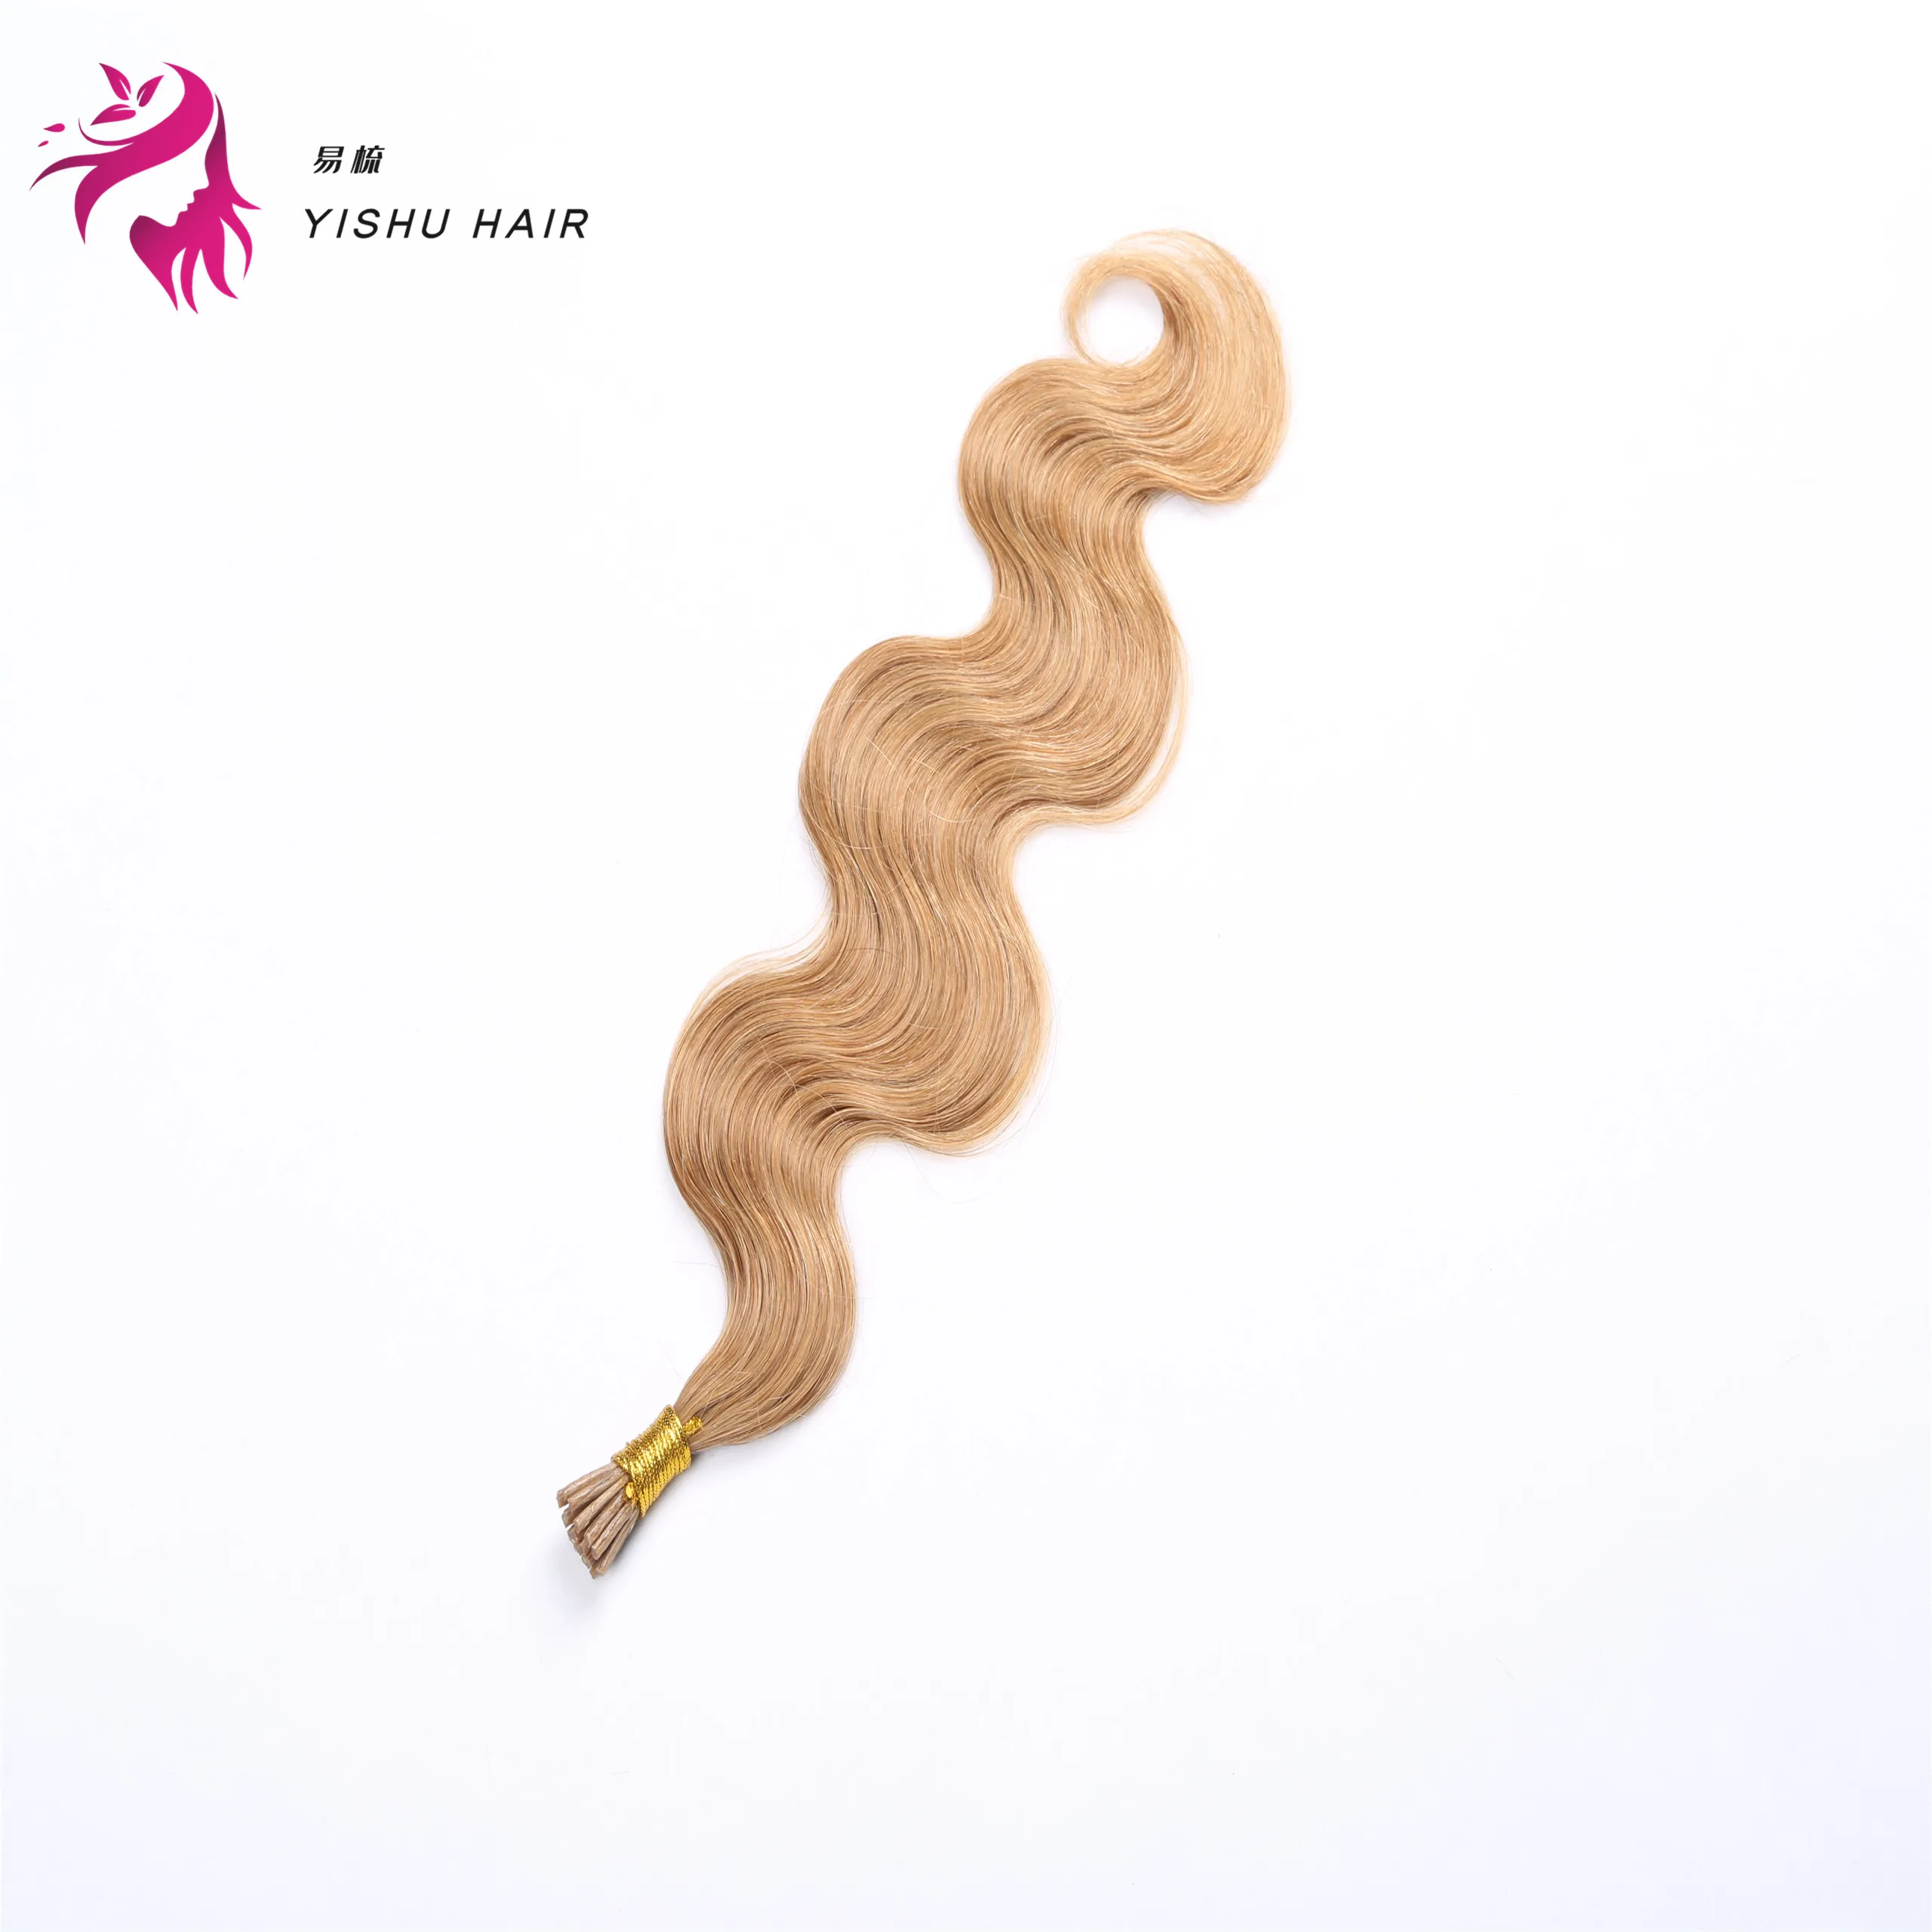 

100 indian human blonde 10-30 inch 2g strands pre bonded remy straight curly i tip hair extensions, Natural color #1b